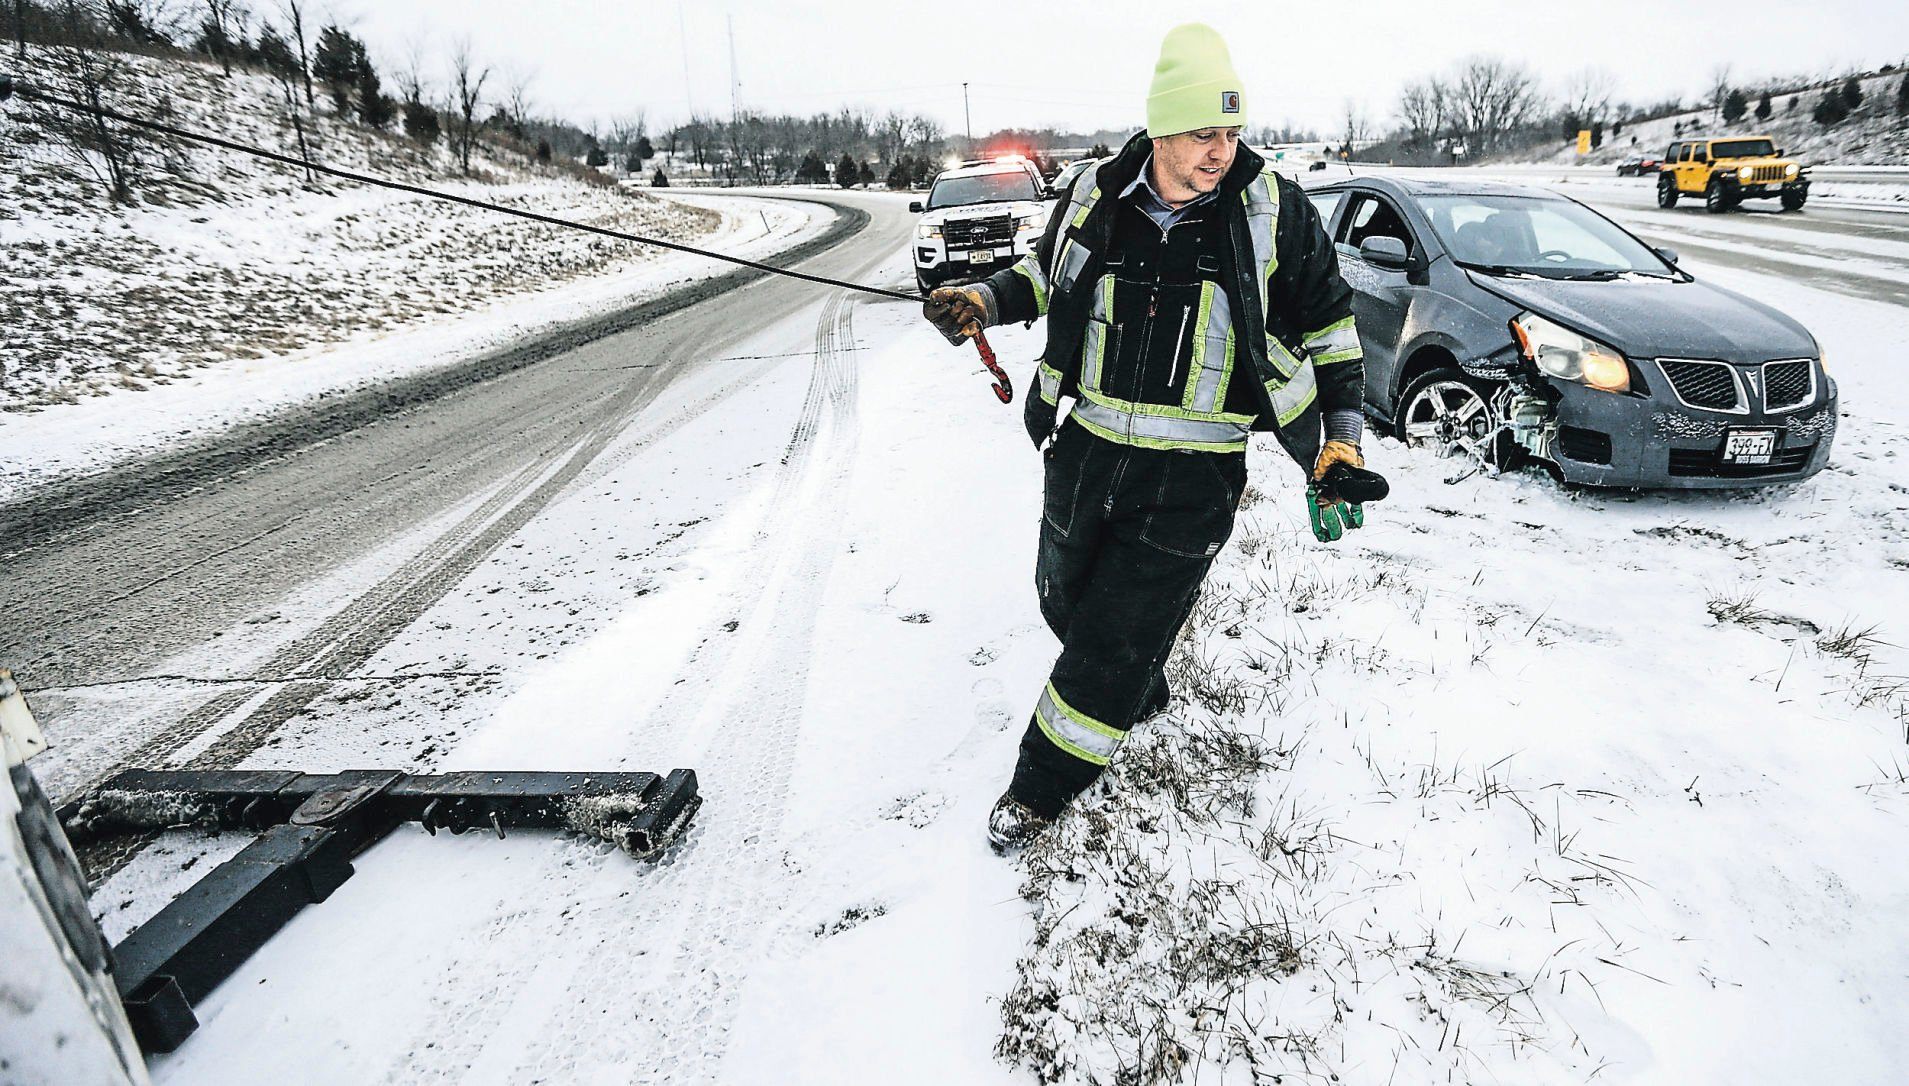 Kevin Barth, of Donnie’s Tire & Auto in Dickeyville, Wis., pulls a motorist out of a ditch after sliding off U.S. 151/61 near the Dubuque-Wisconsin bridge. Towing operators are busy in the winter. They often must battle the elements to perform their duties.    PHOTO CREDIT: Dave Kettering